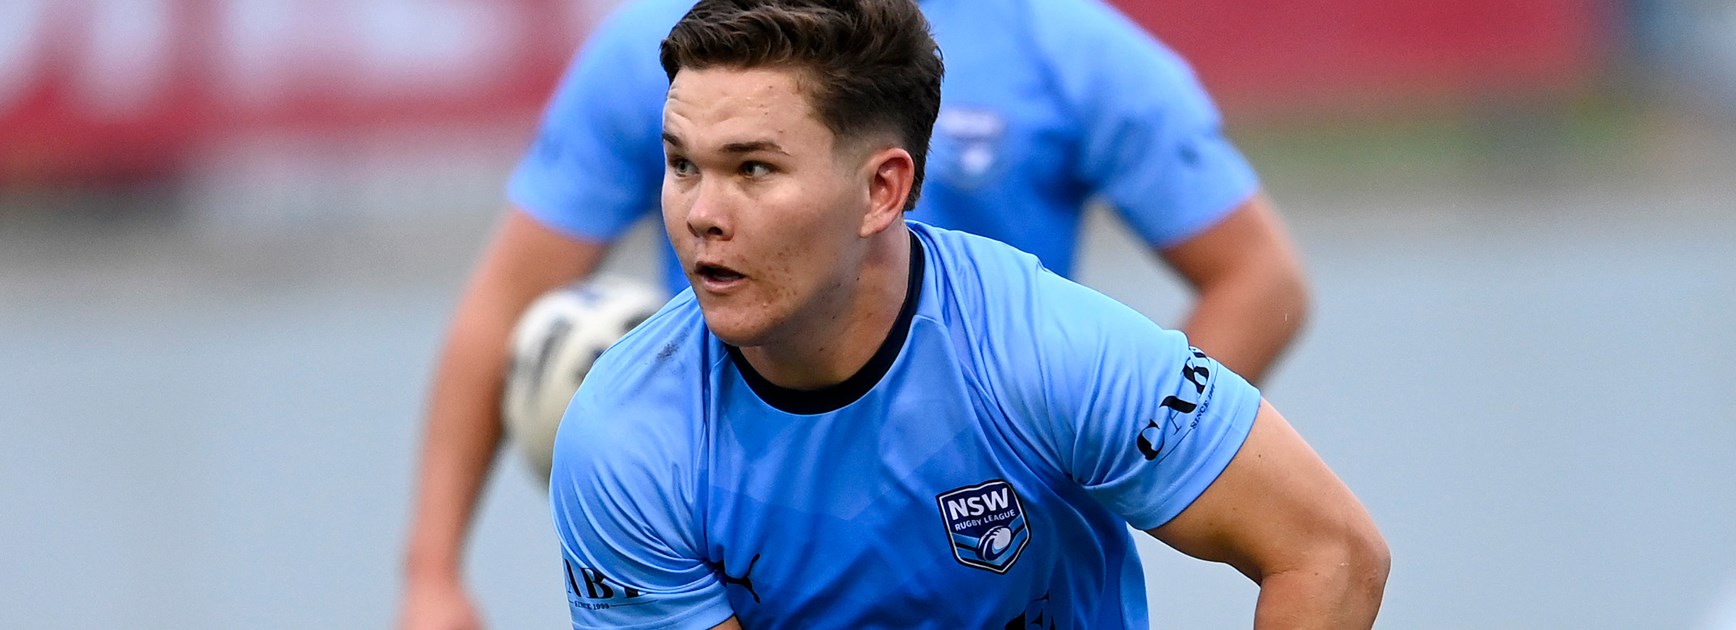 The Titans bolters to watch in Under 19 Origin